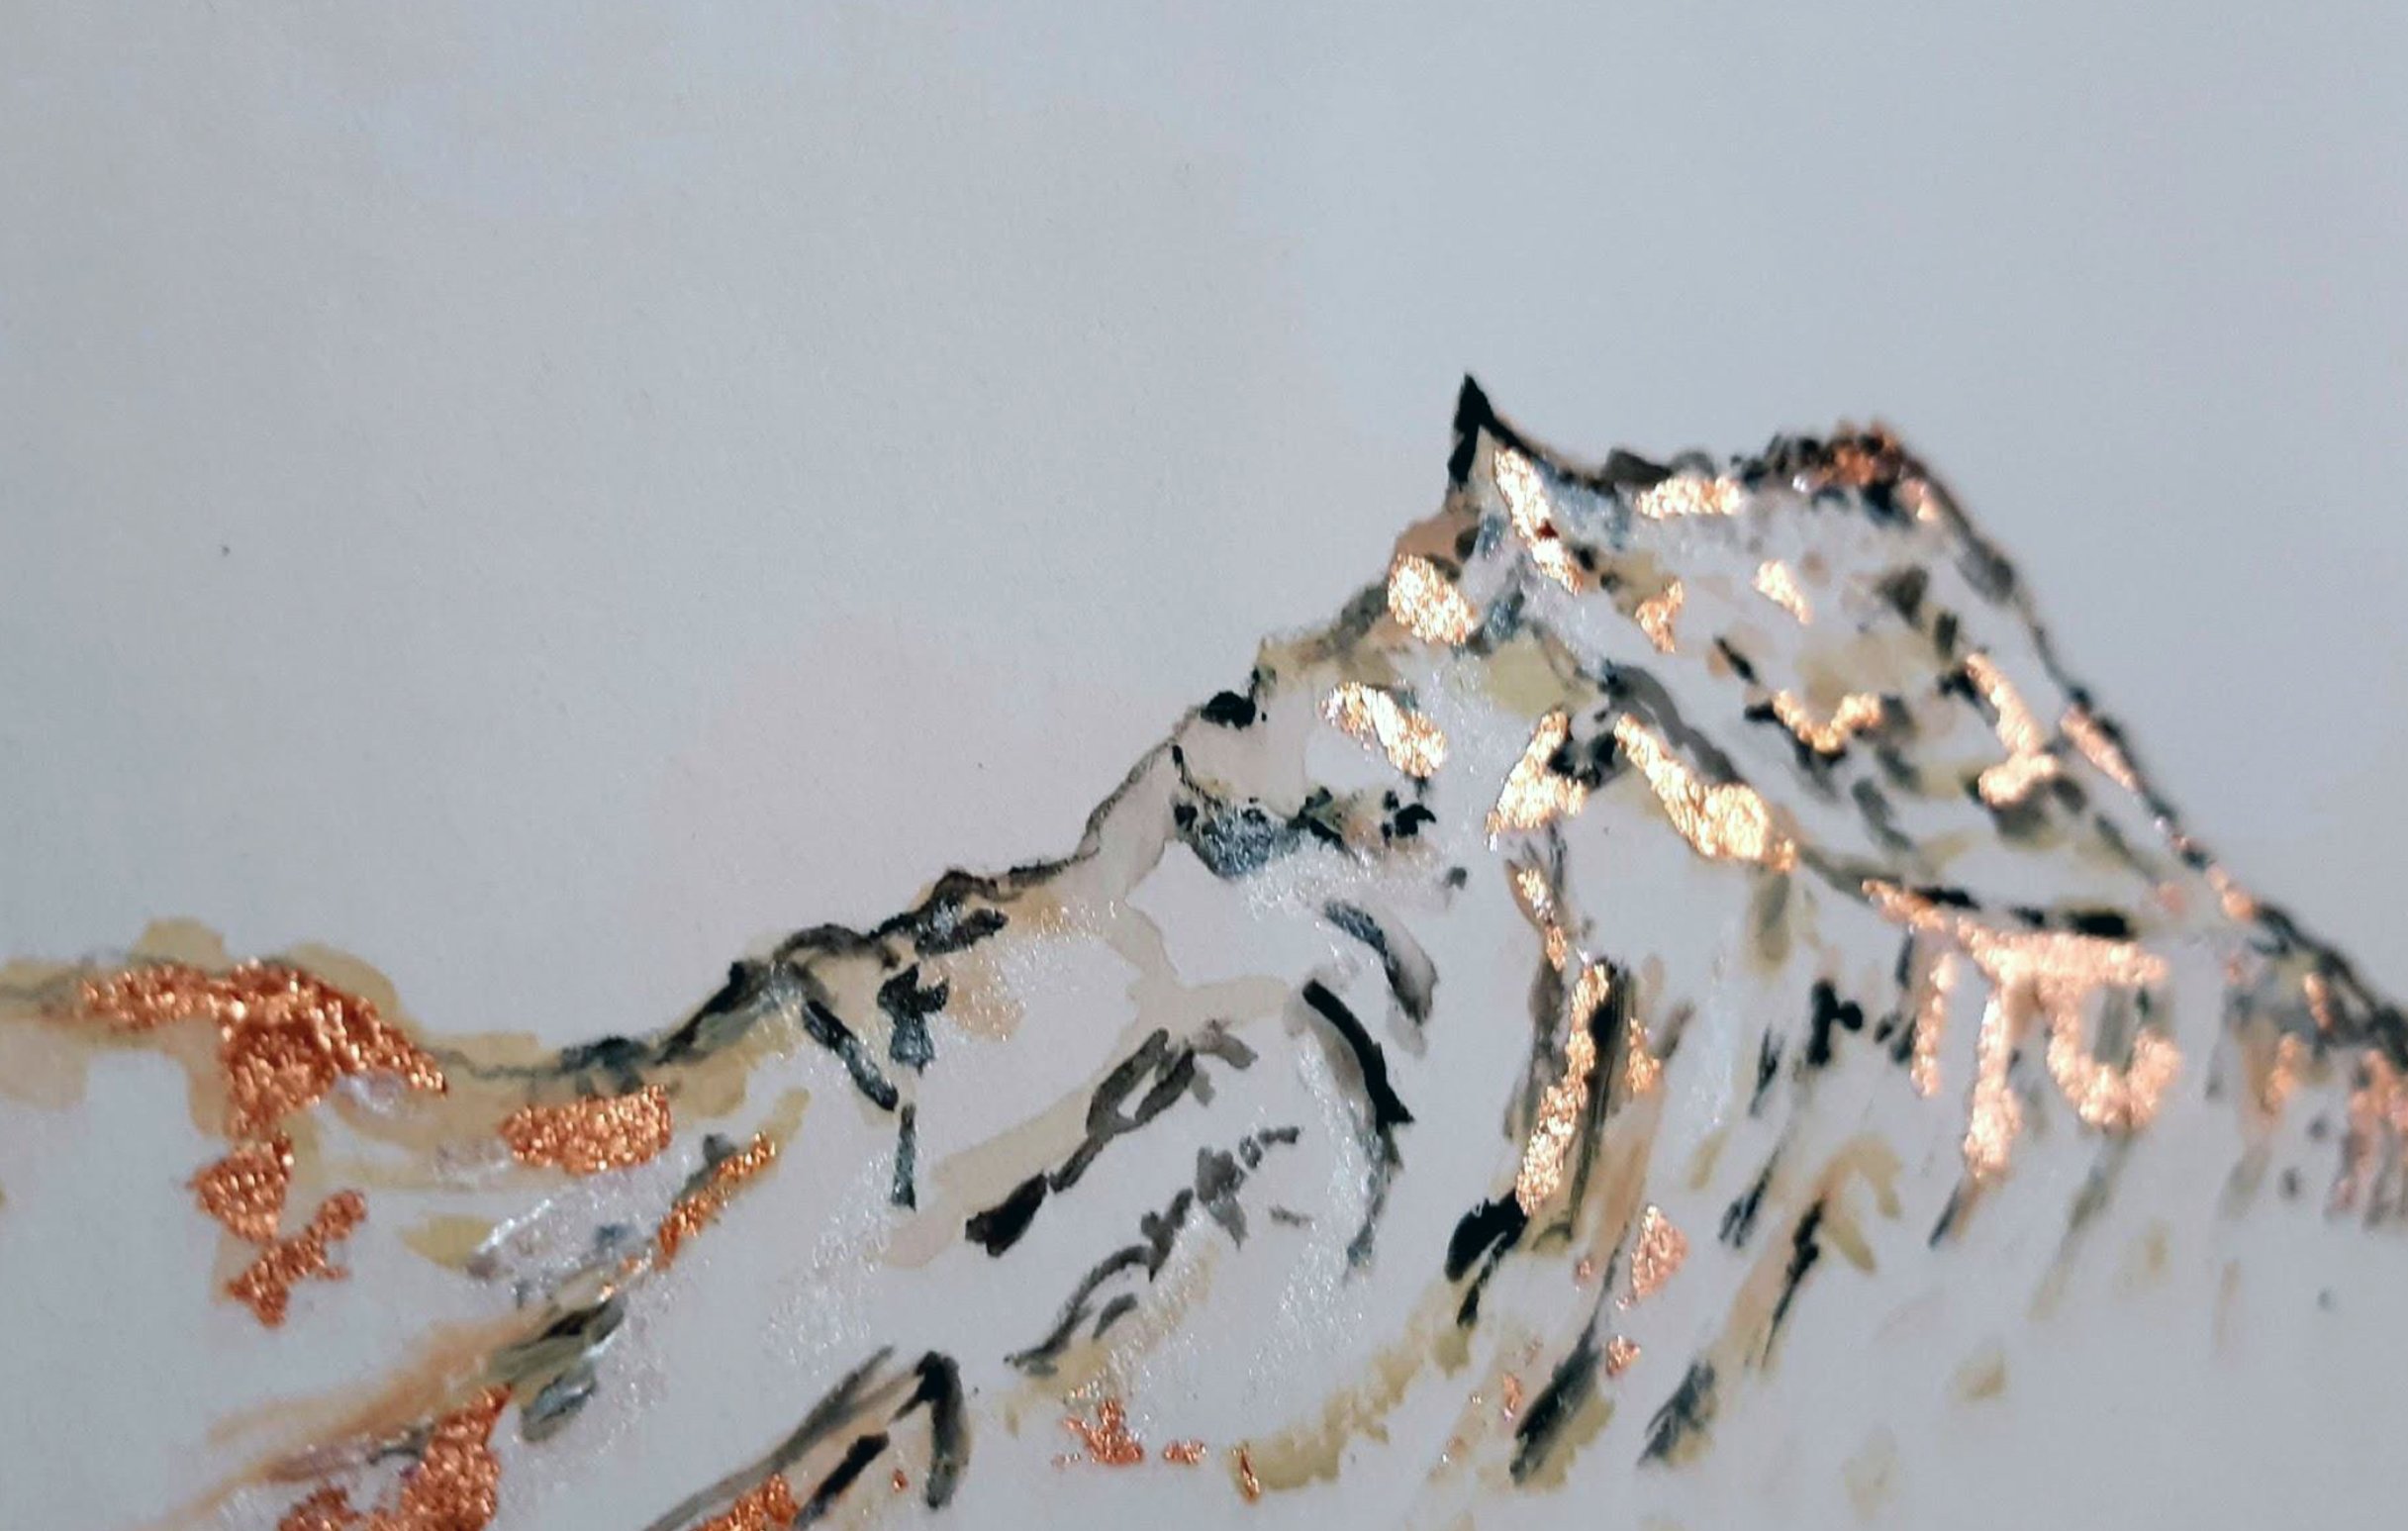  Acrylic painting with copper highlights of the Dents du Midi, Switzerland 